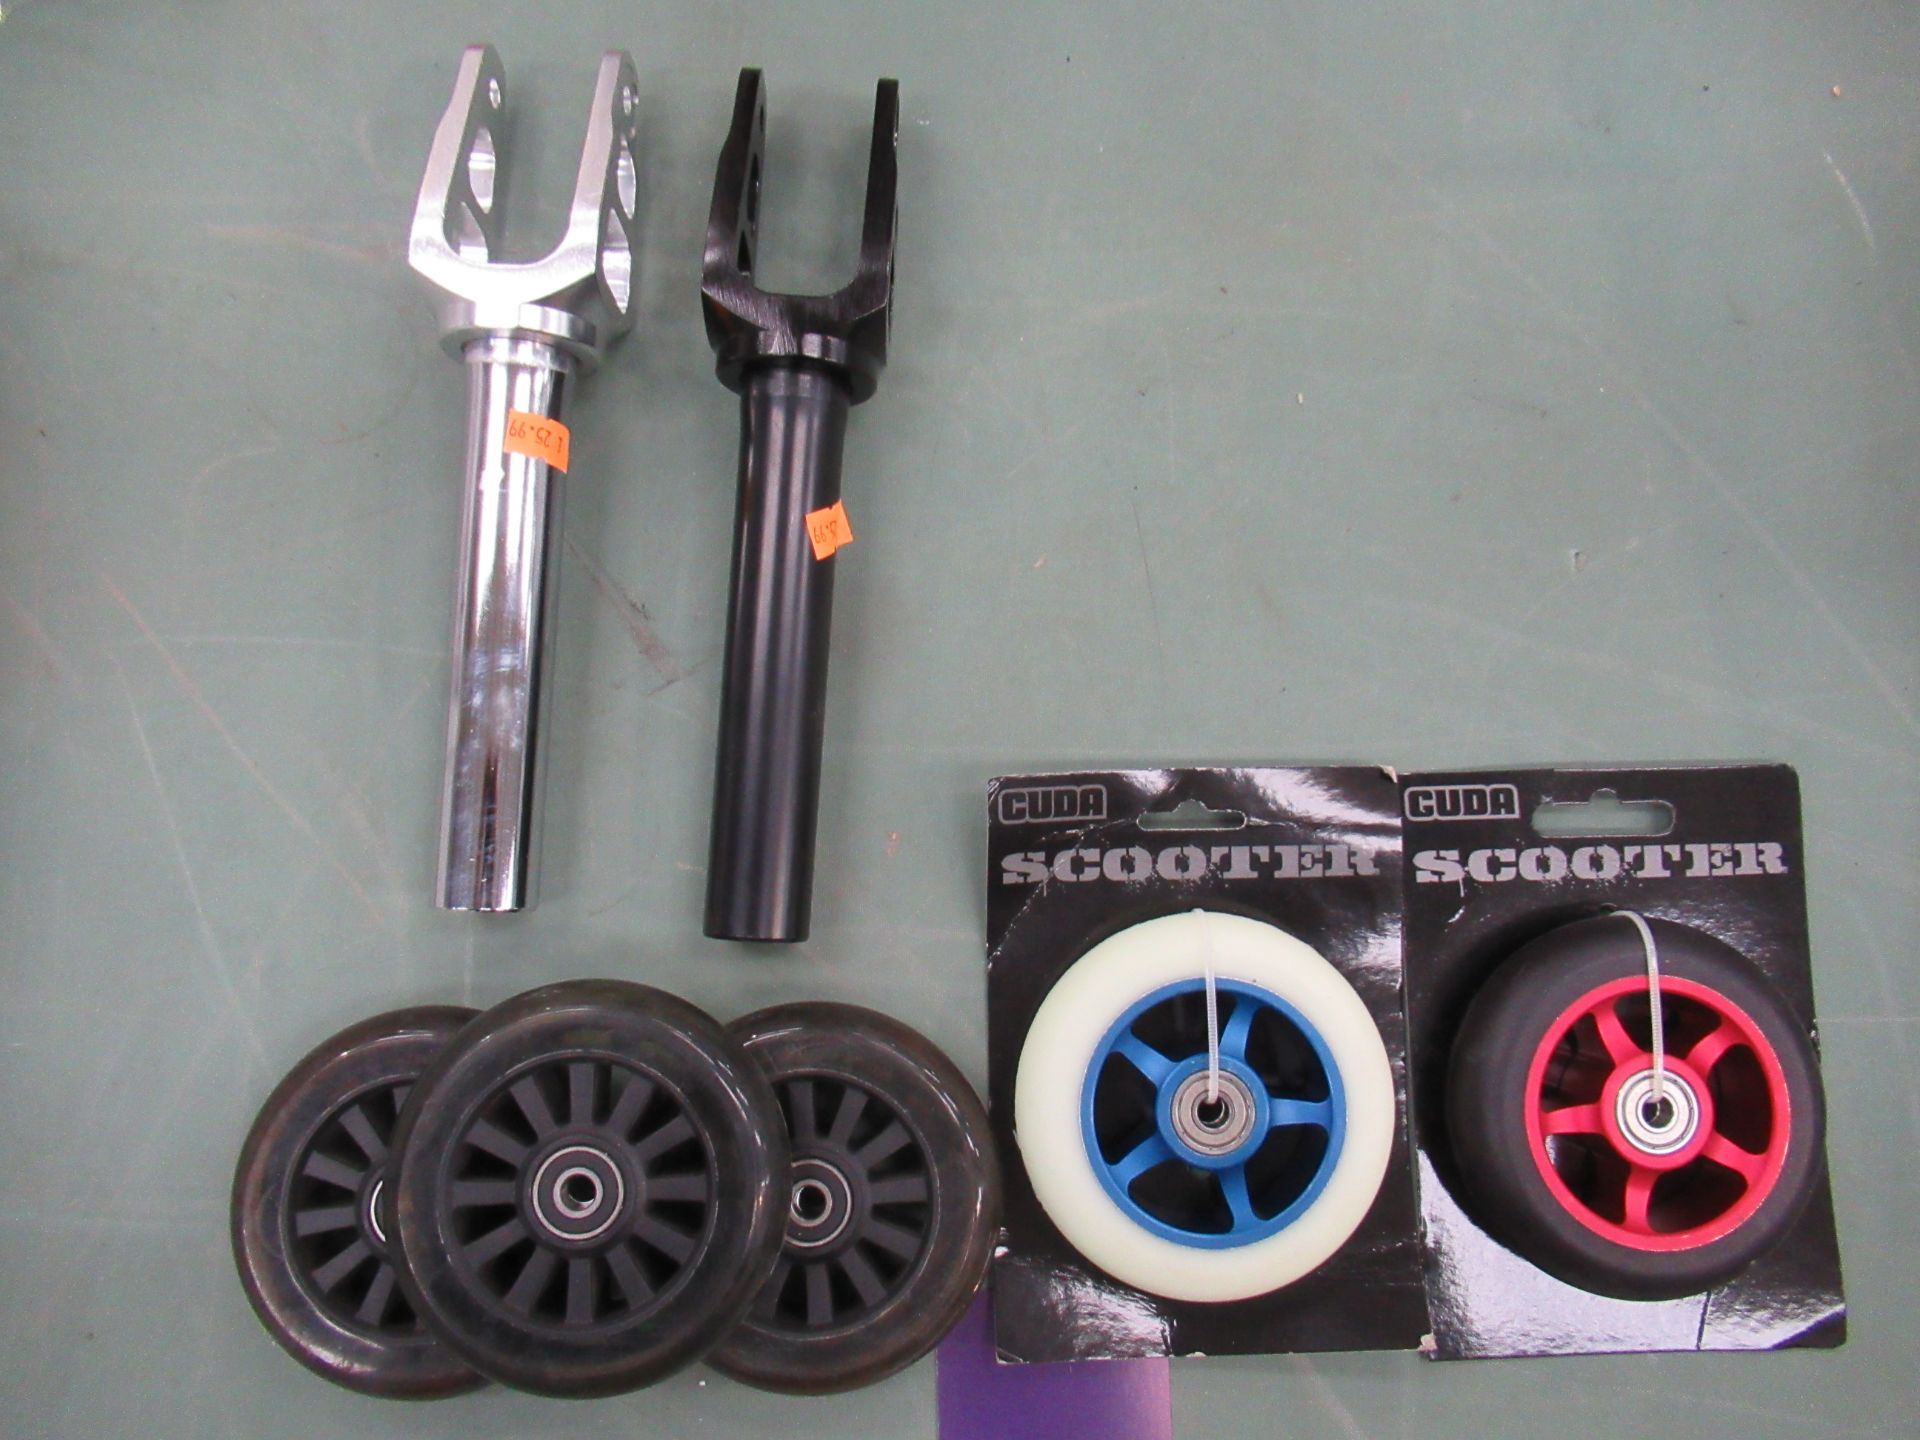 Scooter accessories including 5 x Scooter wheels (RRP£29.99 each) and 2 x Scooter forks (RRP£19.99)